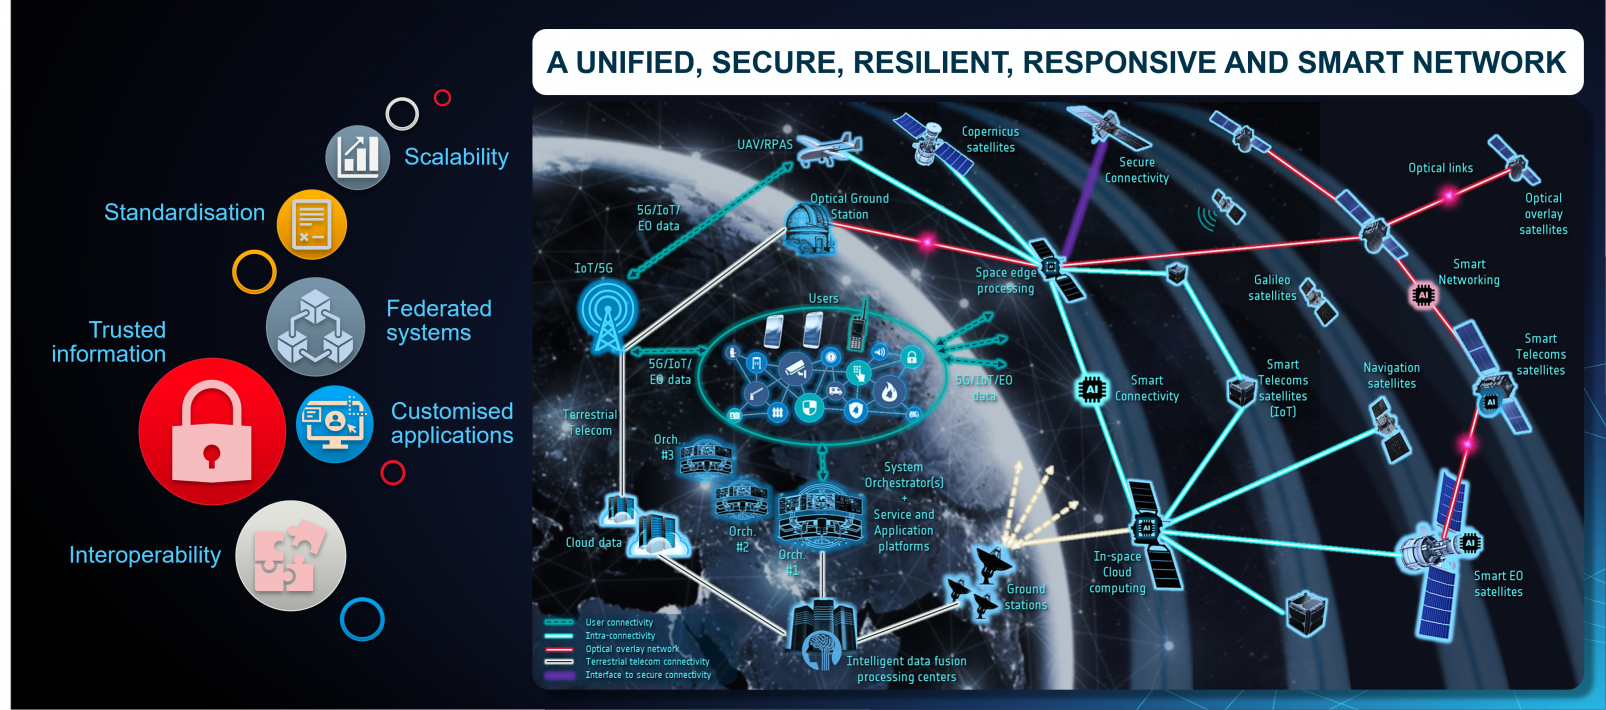 The vision for 2035 of the Civil Security from Space programme to foster the creation of a unified, secure, resilient, responsive and smart network for civil security players.